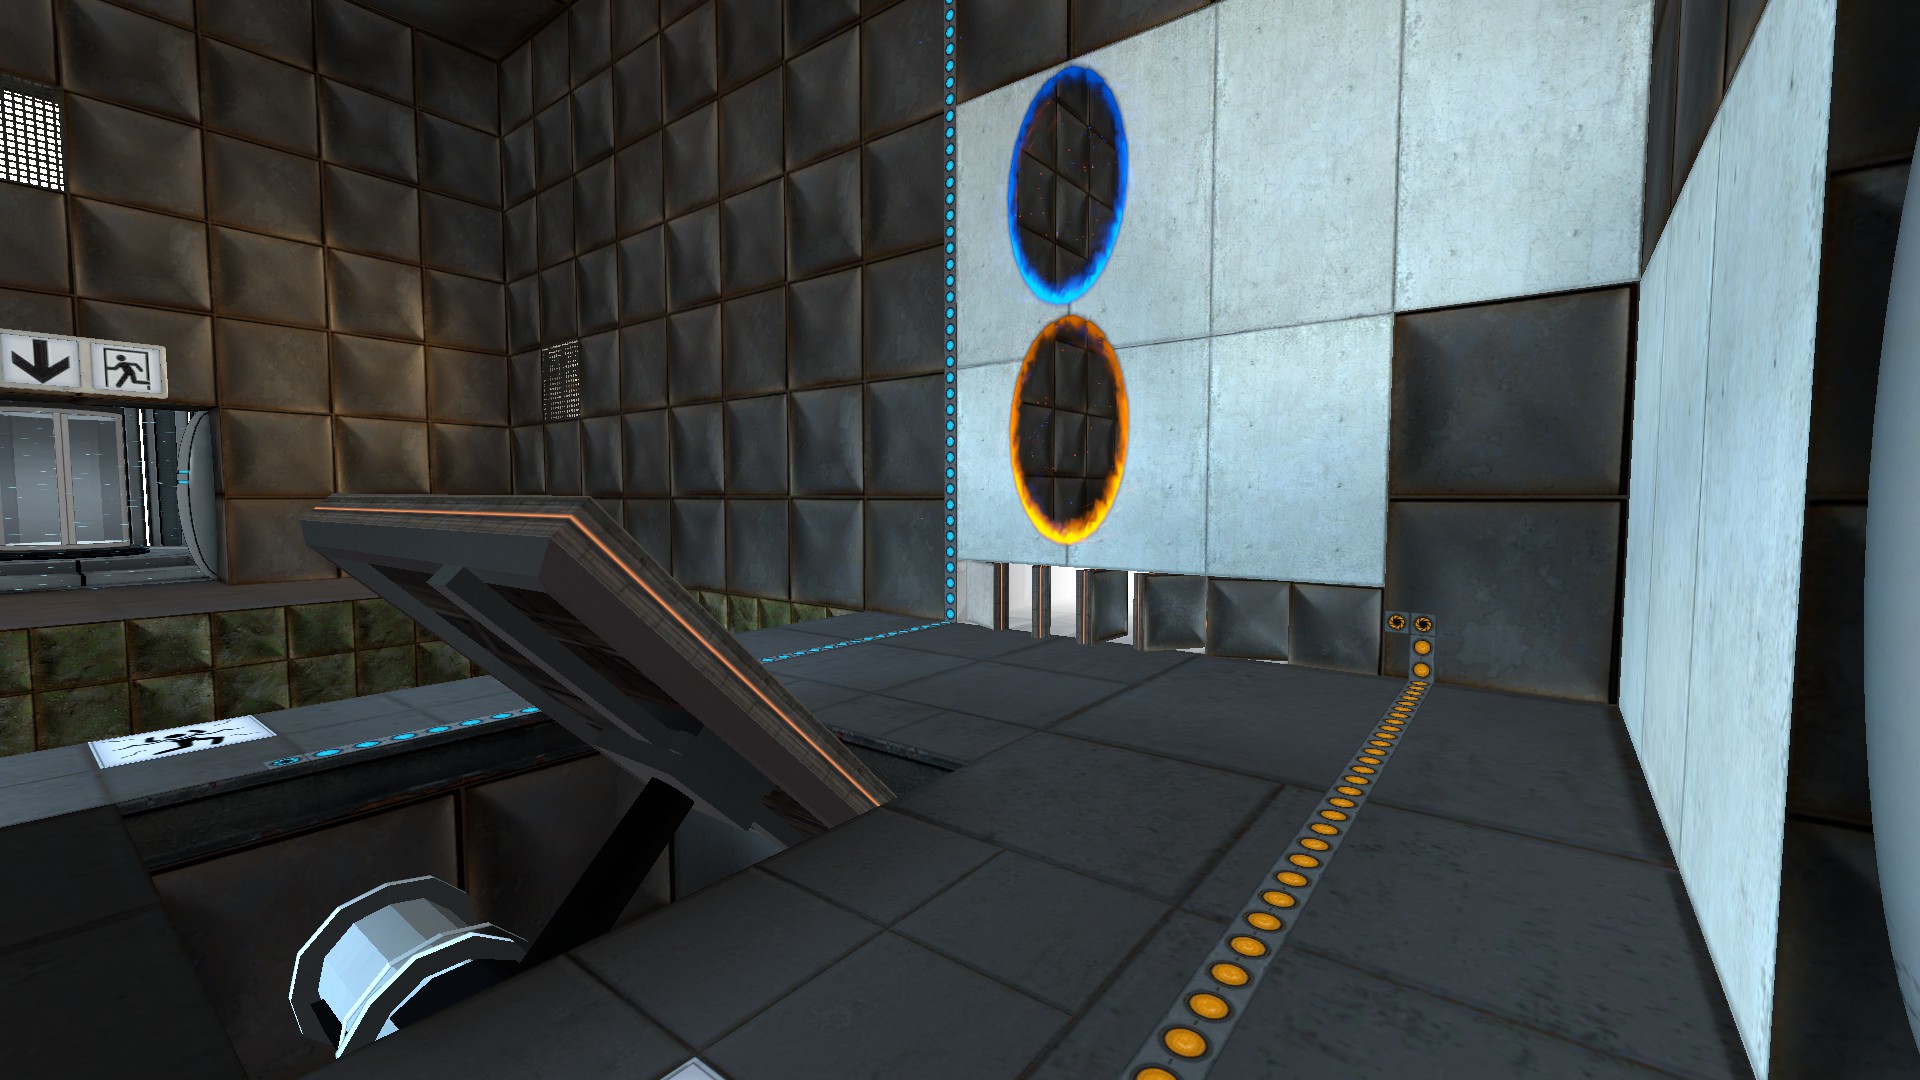 Wall tiles in the final room flip from portal proof to portalable.